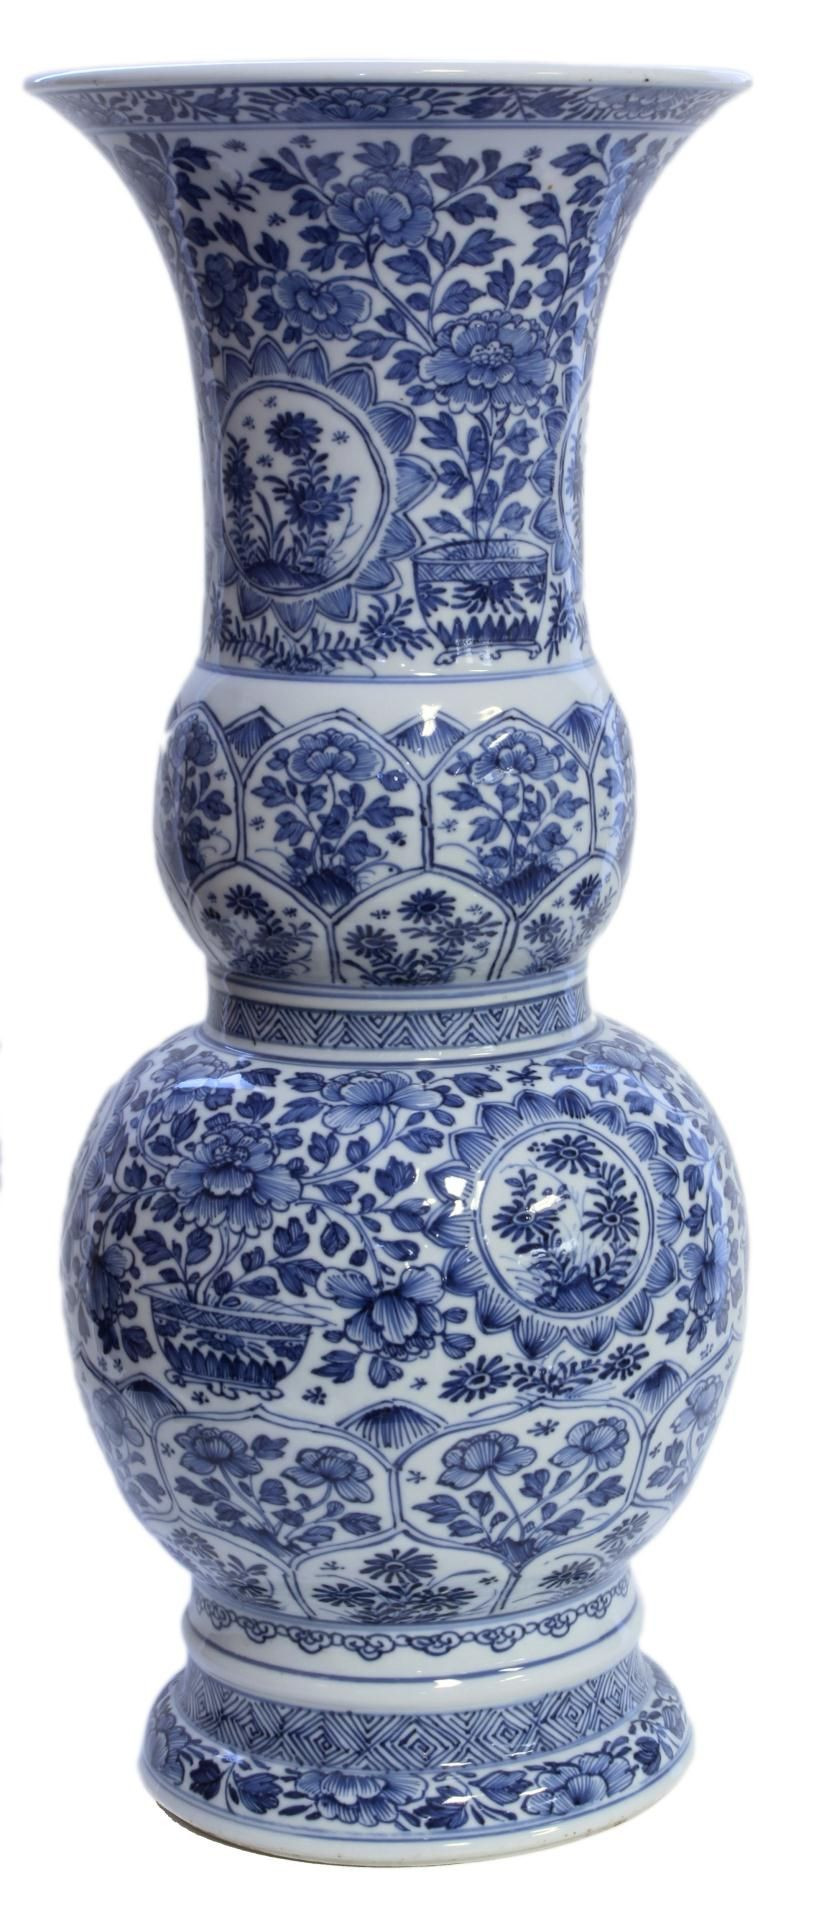 16 Famous Blue and White Porcelain Vases for Sale 2024 free download blue and white porcelain vases for sale of chinese blue white kangxi period porcelain vase blue white in with regard to chinese blue white kangxi period porcelain vase white vases blue and w